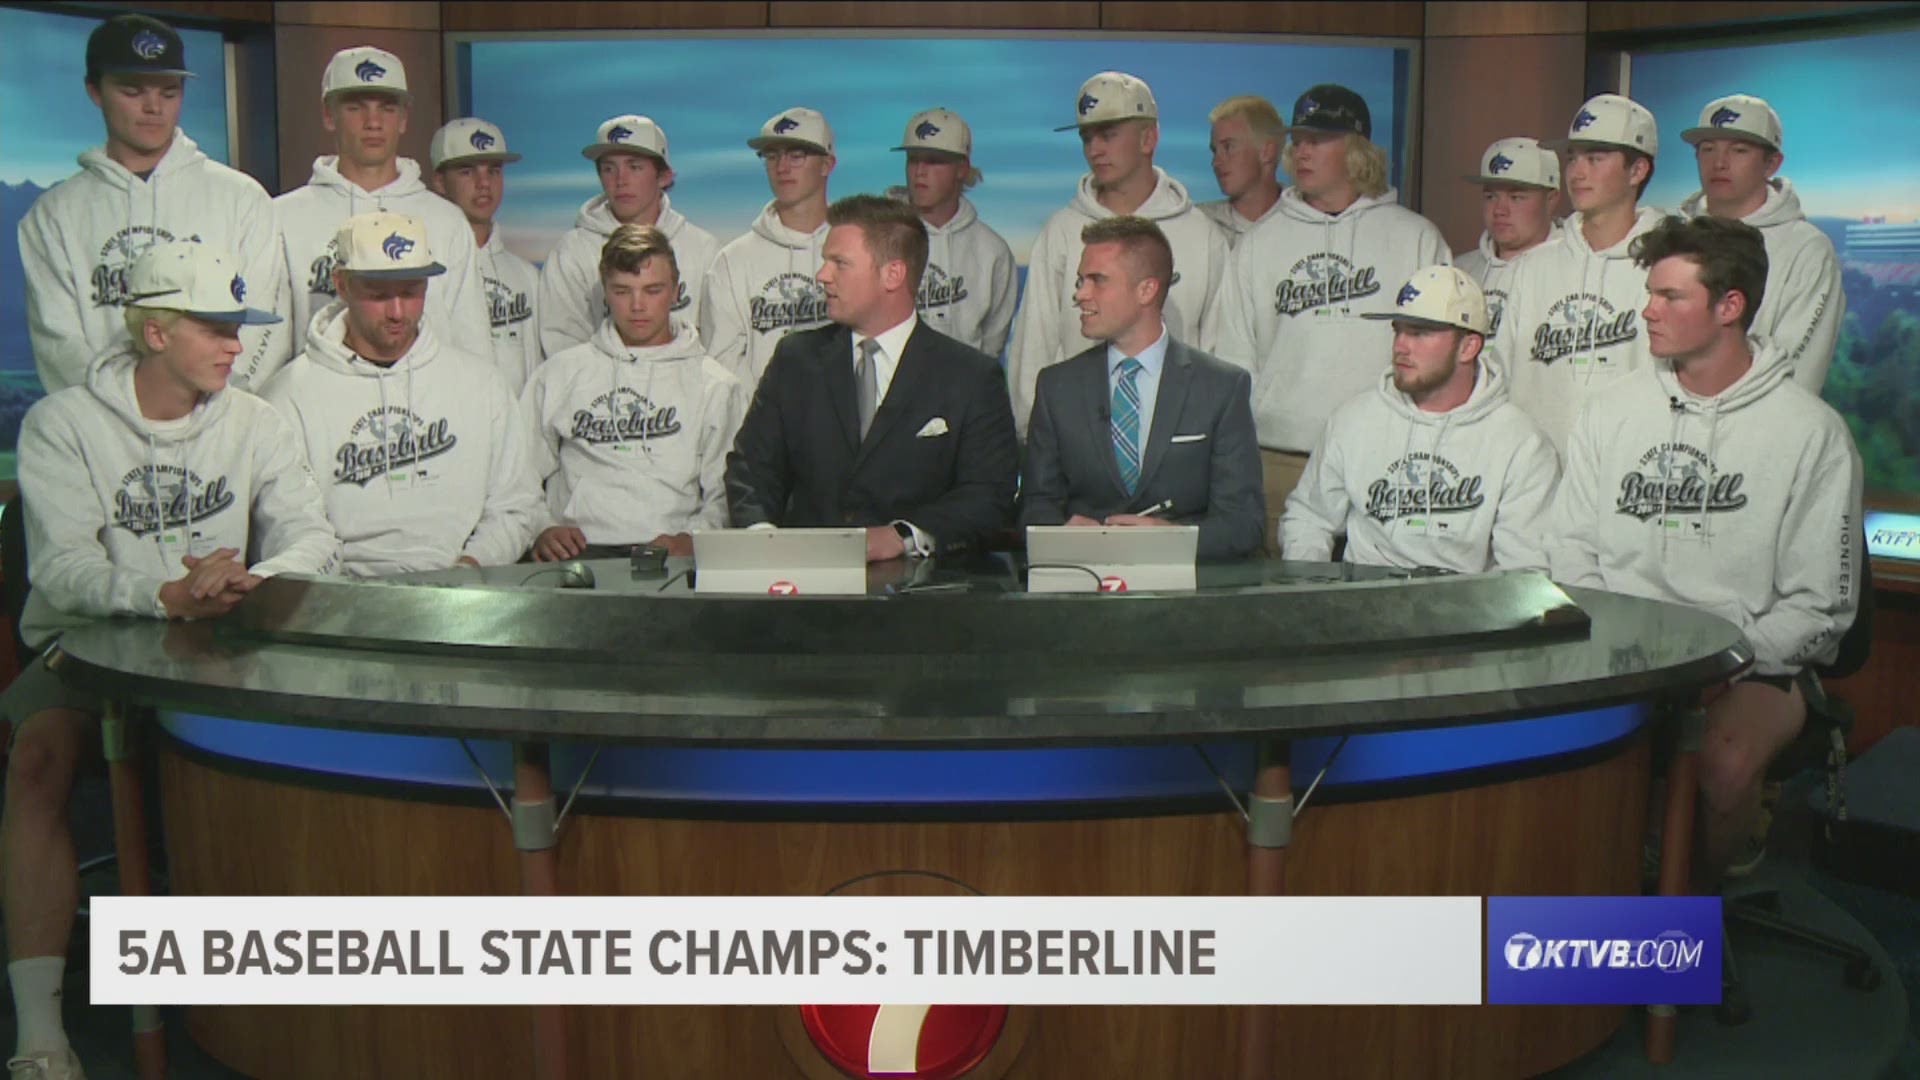 The 2018 5A state baseball champions, the Timberline Wolves, joined Jay Tust and Will Hall in studio after their win over Bonneville.